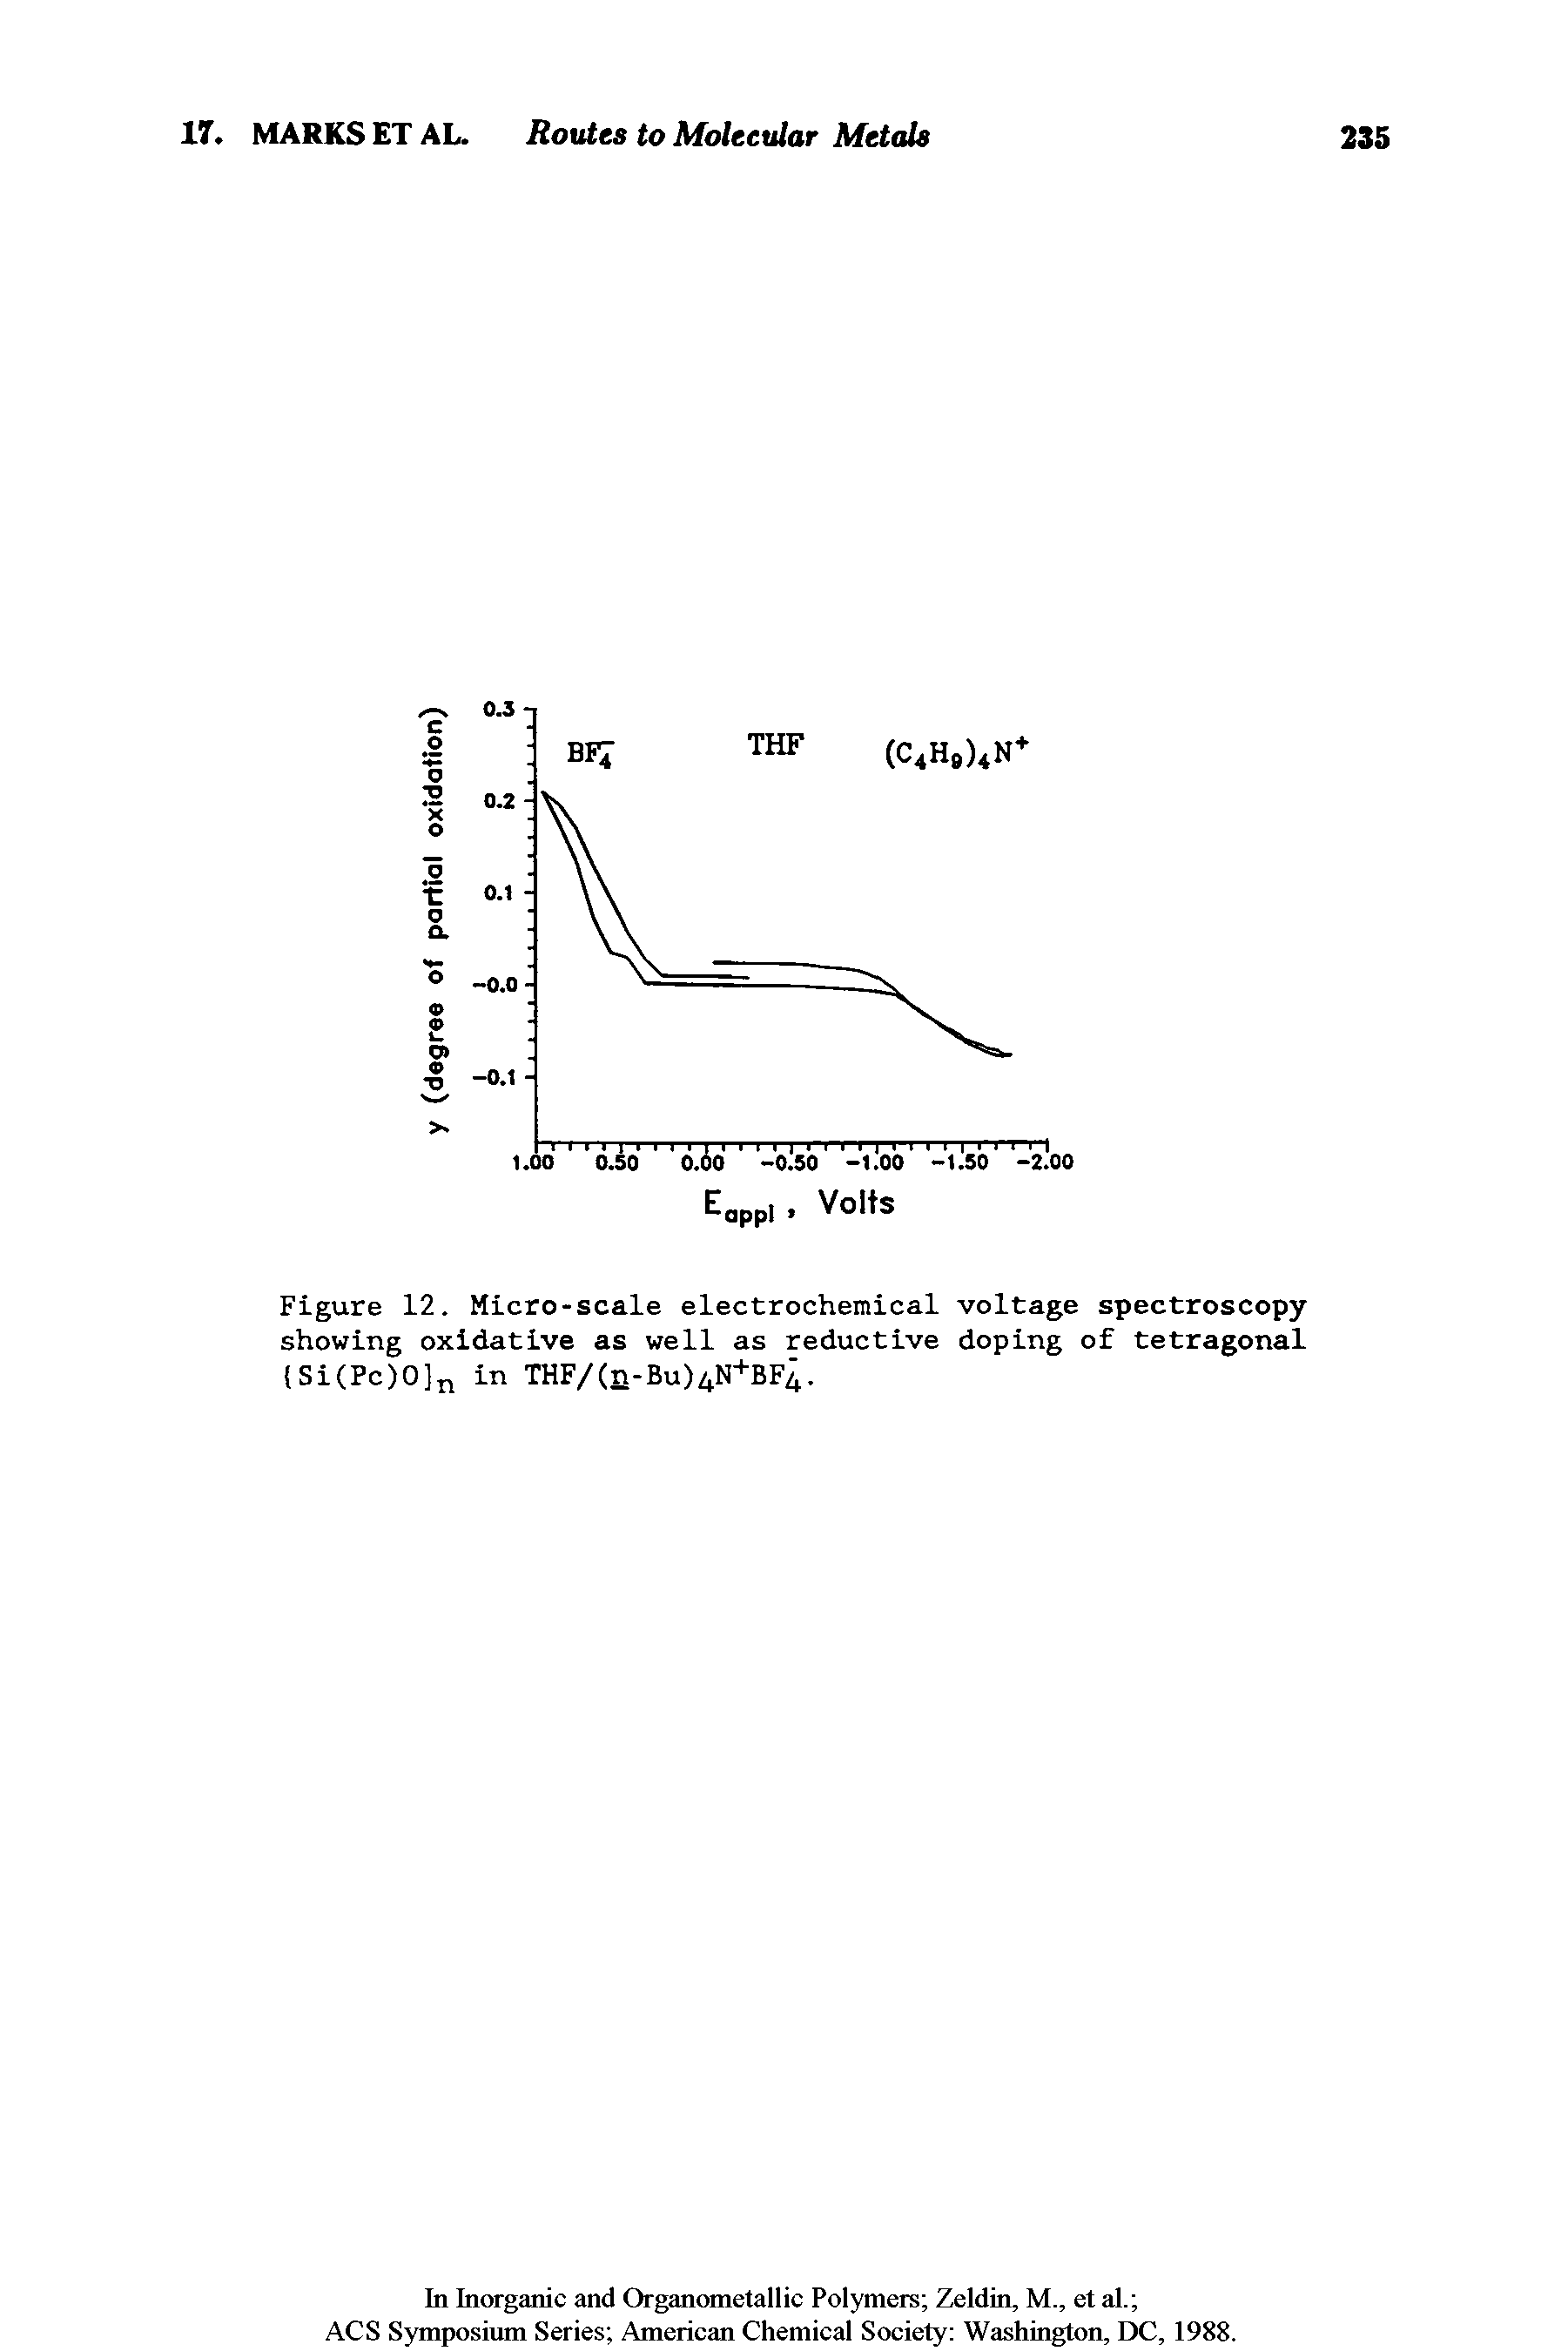 Figure 12. Micro-scale electrochemical voltage spectroscopy showing oxidative as well as reductive doping of tetragonal Si(Pc)0]n in THF/(n-Bu)4N+BF4.